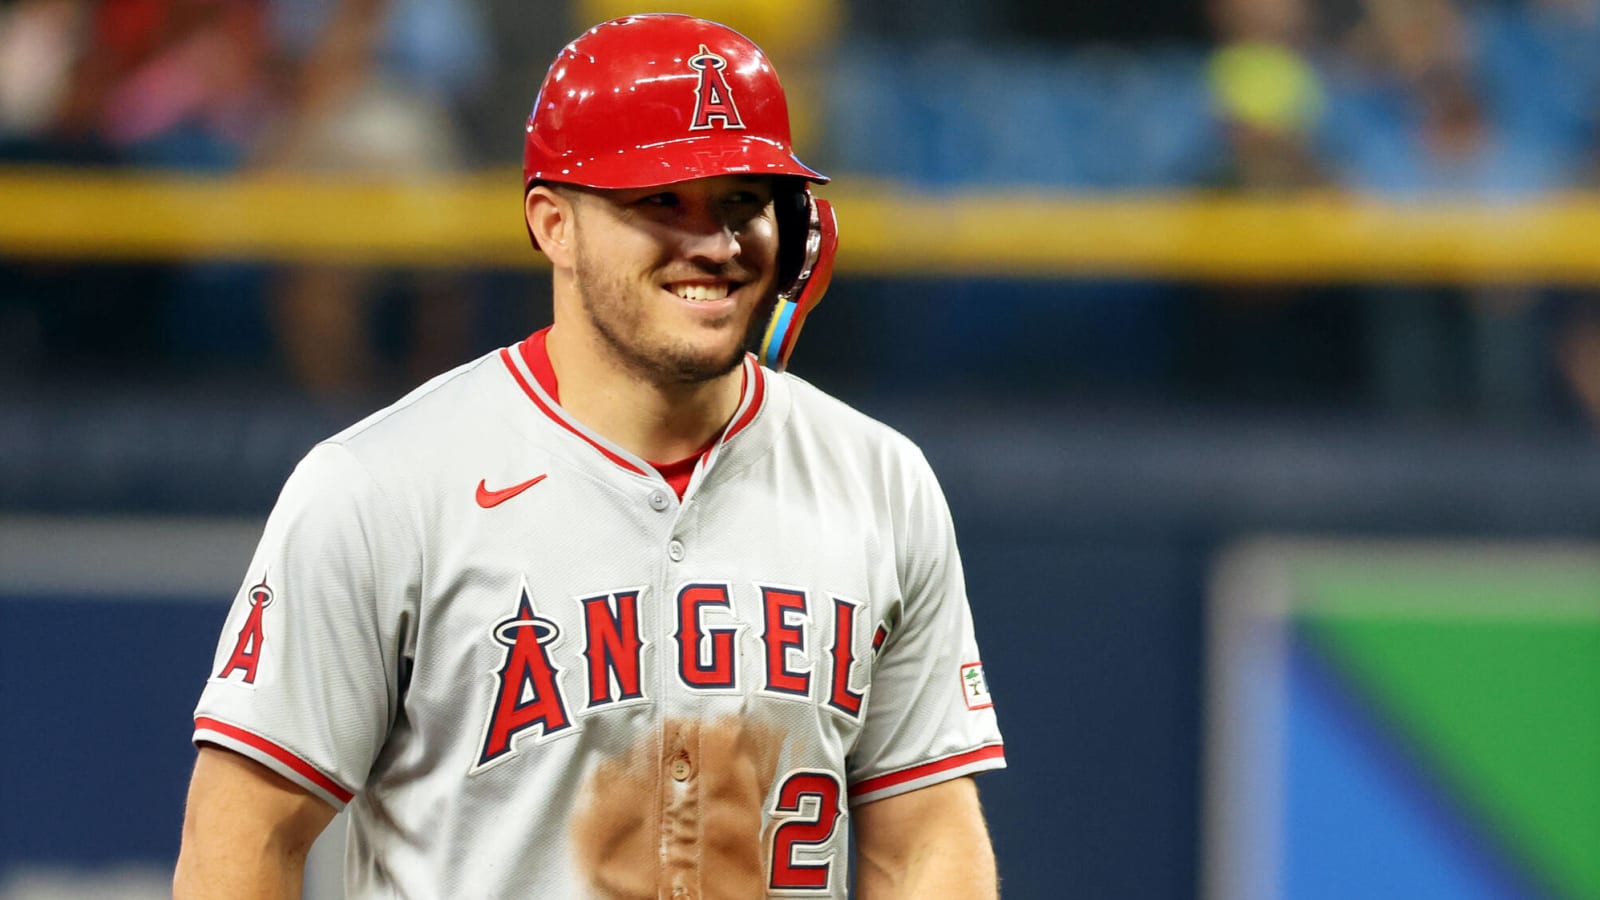 Could the Braves Make a Mike Trout Trade Happen?